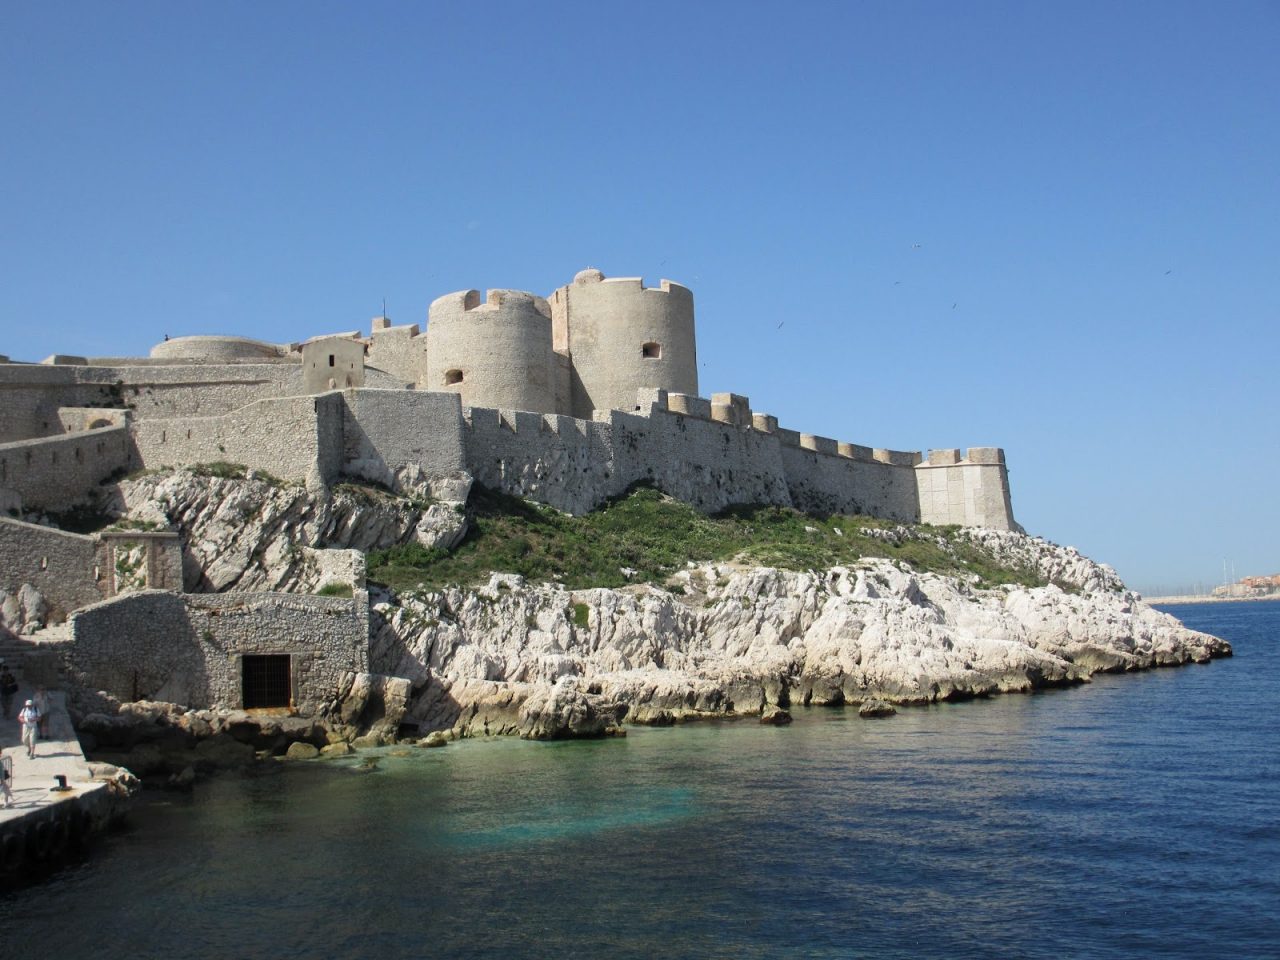 World___France_Fortress_in_Marseille__France_072030_-1280x960.jpg